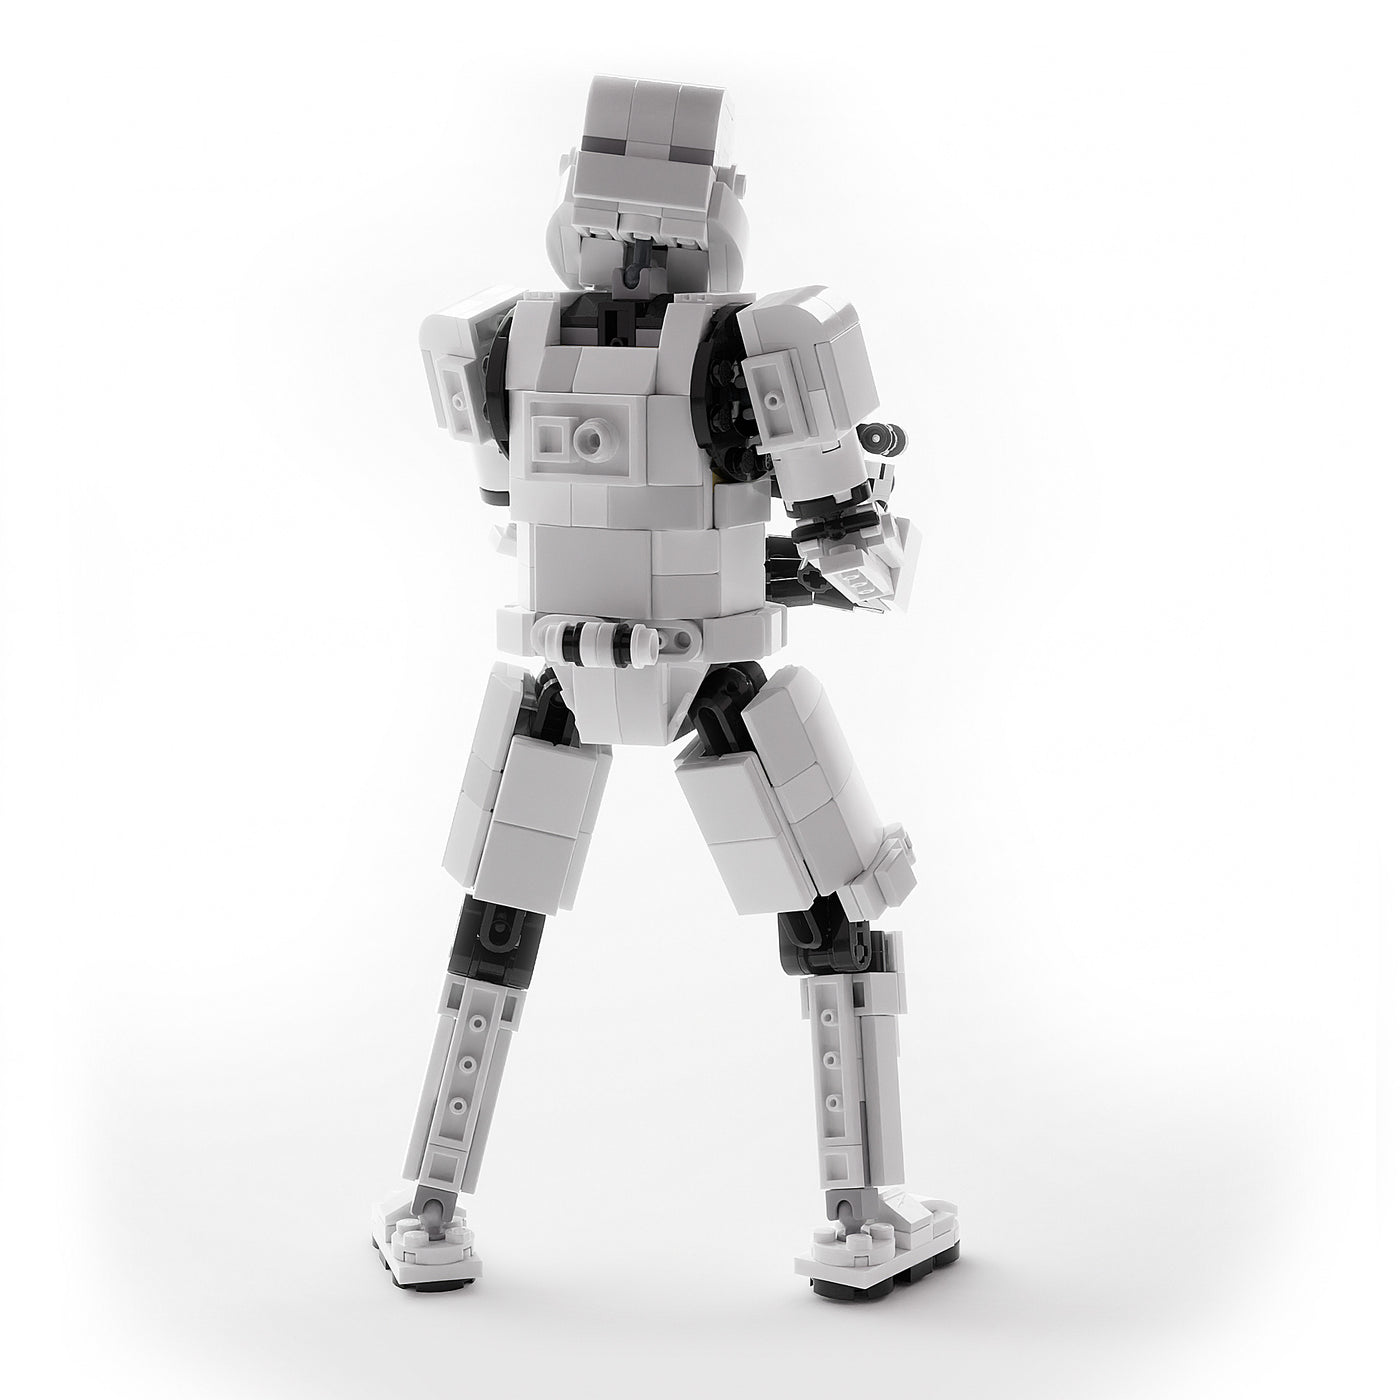 Instructions for Custom Lego Star Wars 9 Phase 2 Clone Trooper